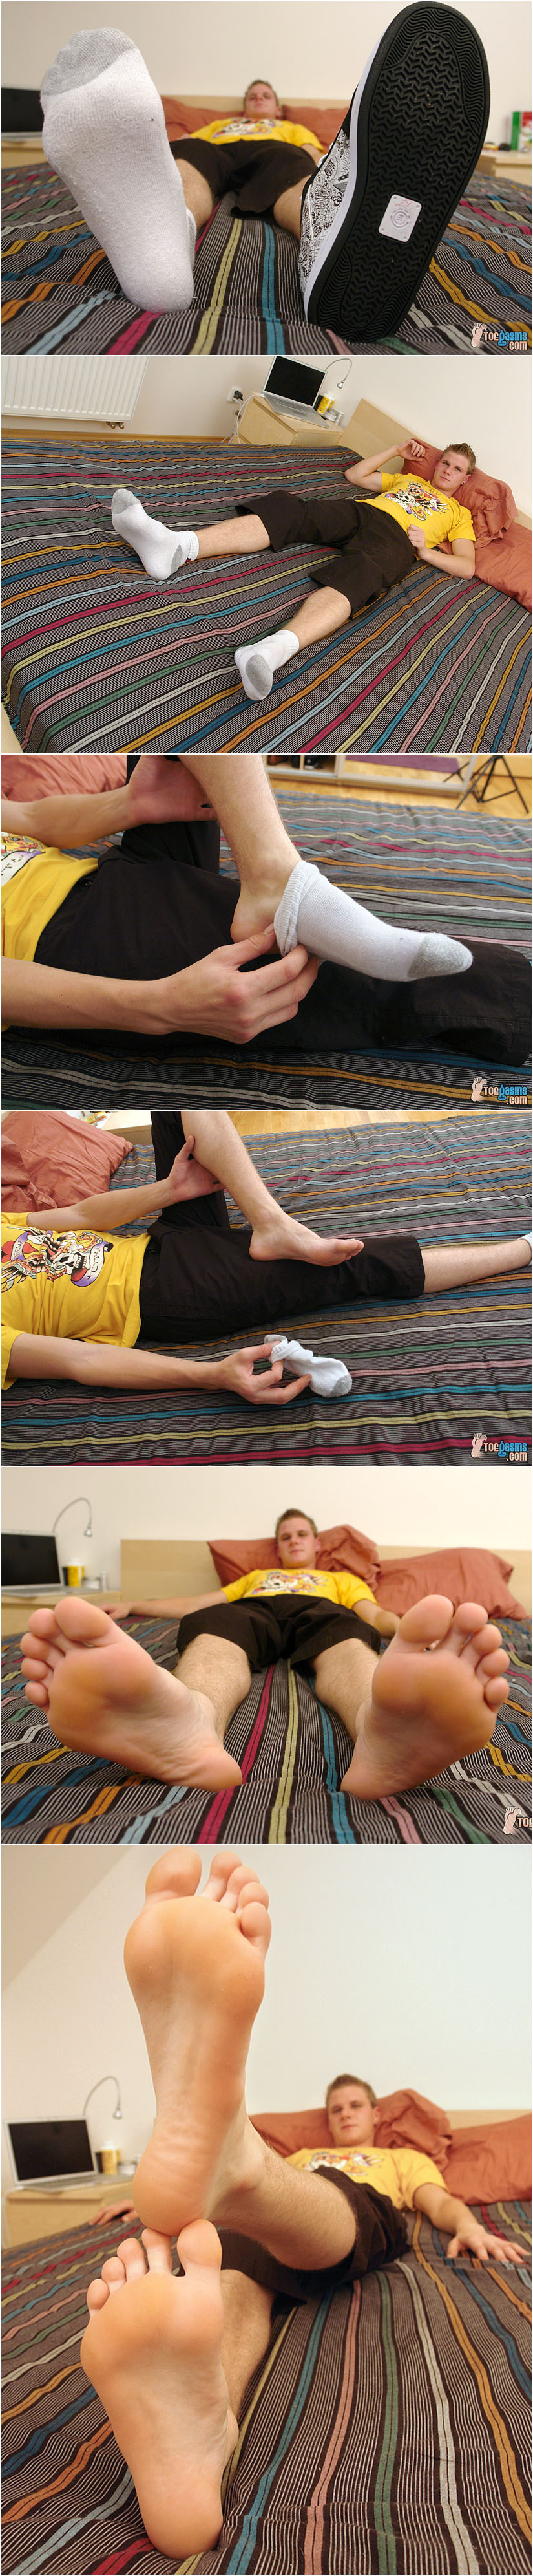 Blond European guy shows off his bare feet